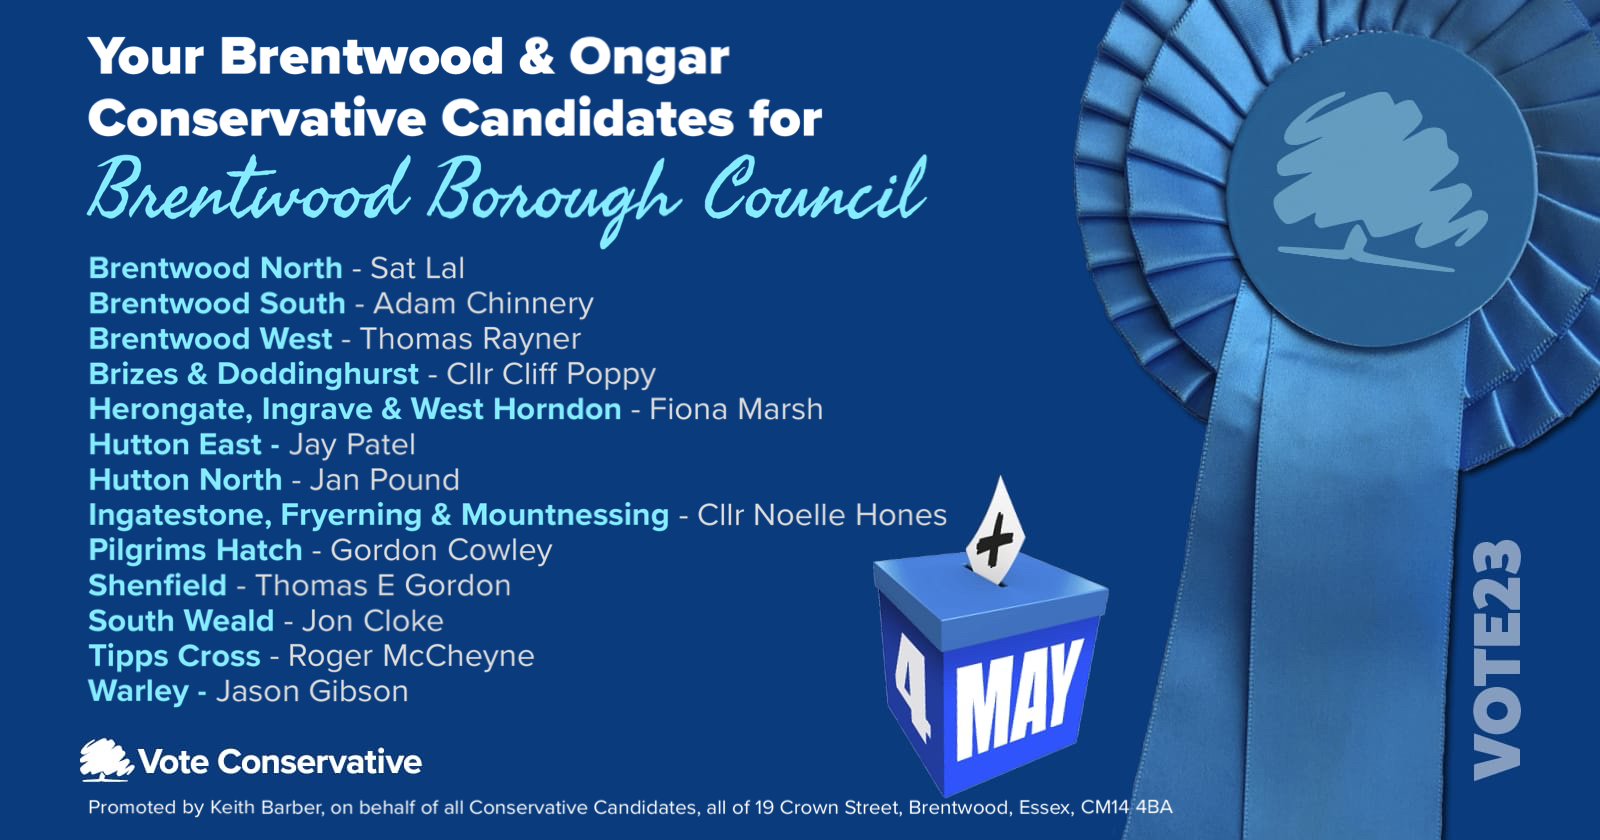 Brentwood Borough Council Candidates